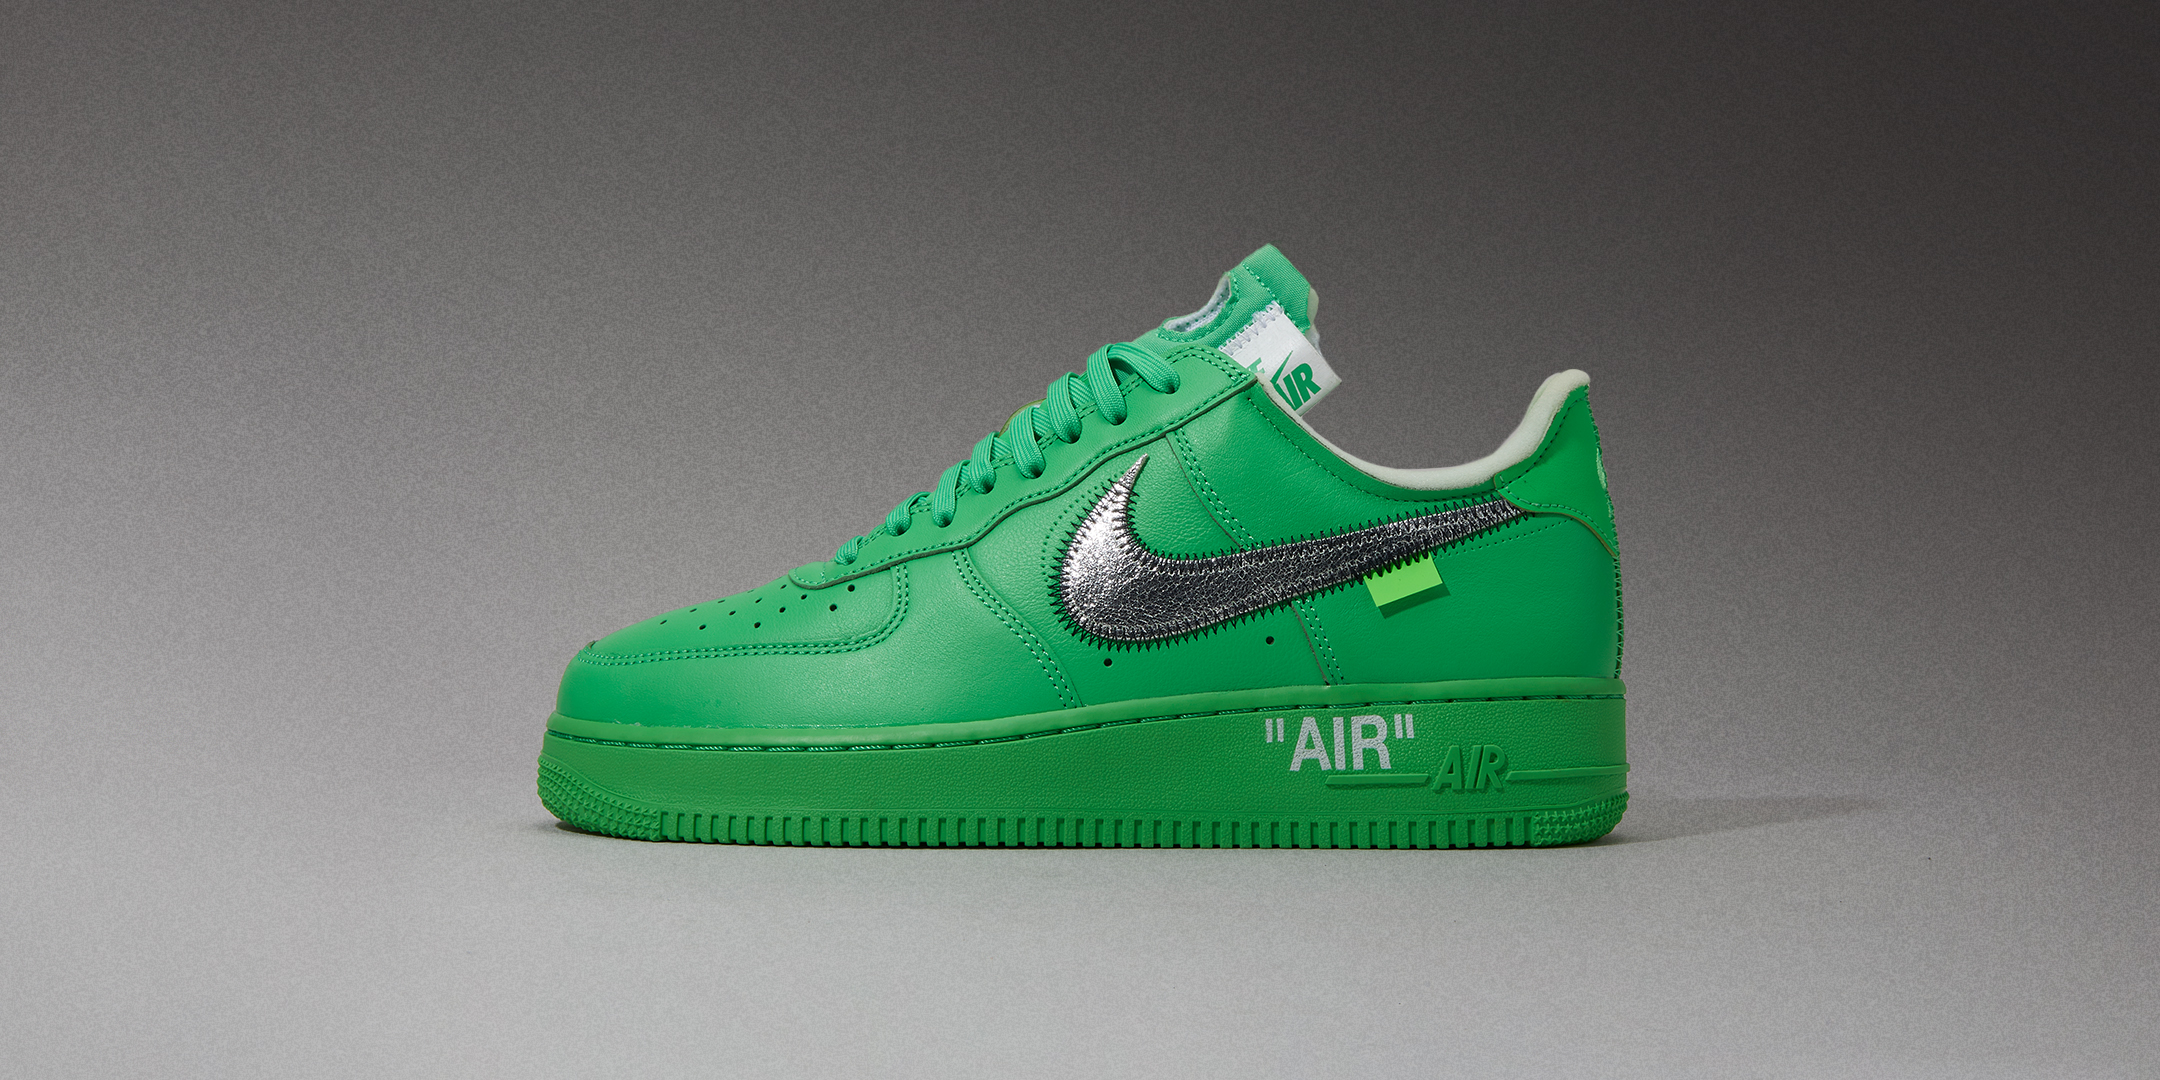 Flight Club on X: The Off-White x Air Force 1 Low 'Light Green Spark' was  first spotted on the feet of staff members at Virgil Abloh's Brooklyn  Museum exhibit. The stitch-on Swoosh